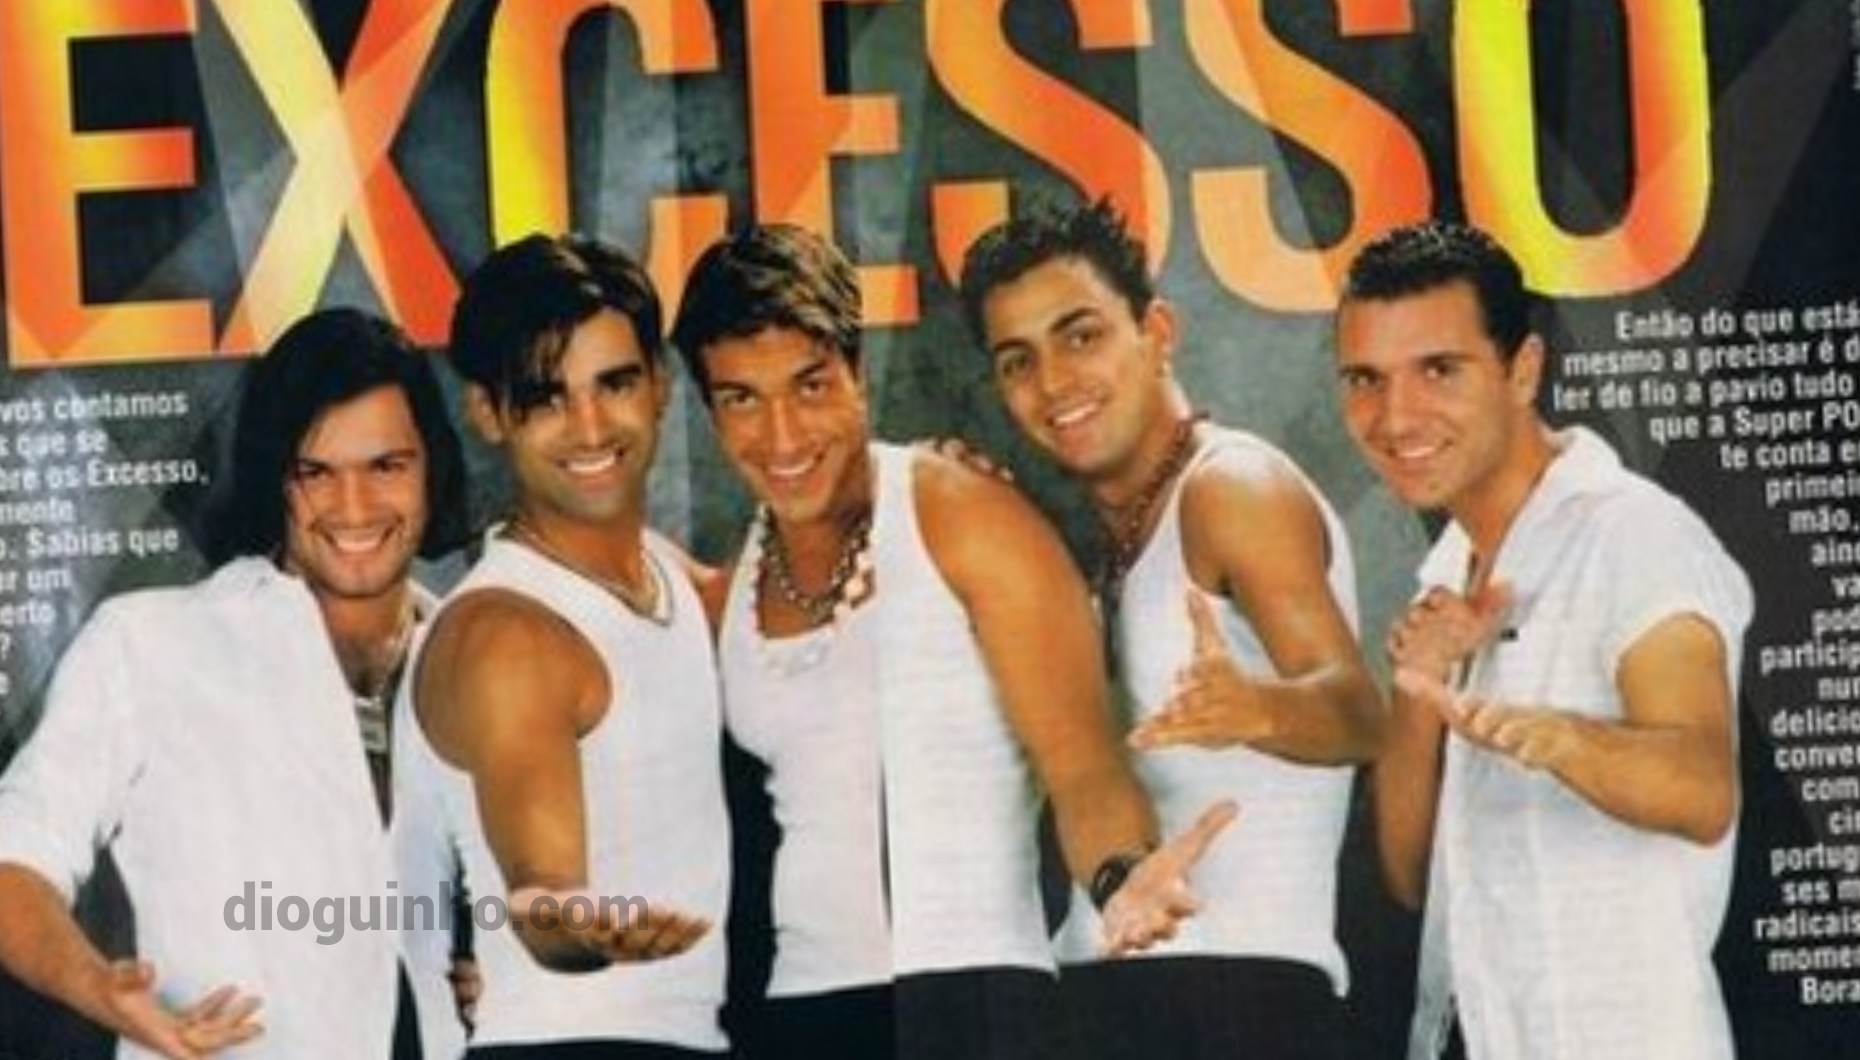 boys-band-excesso-